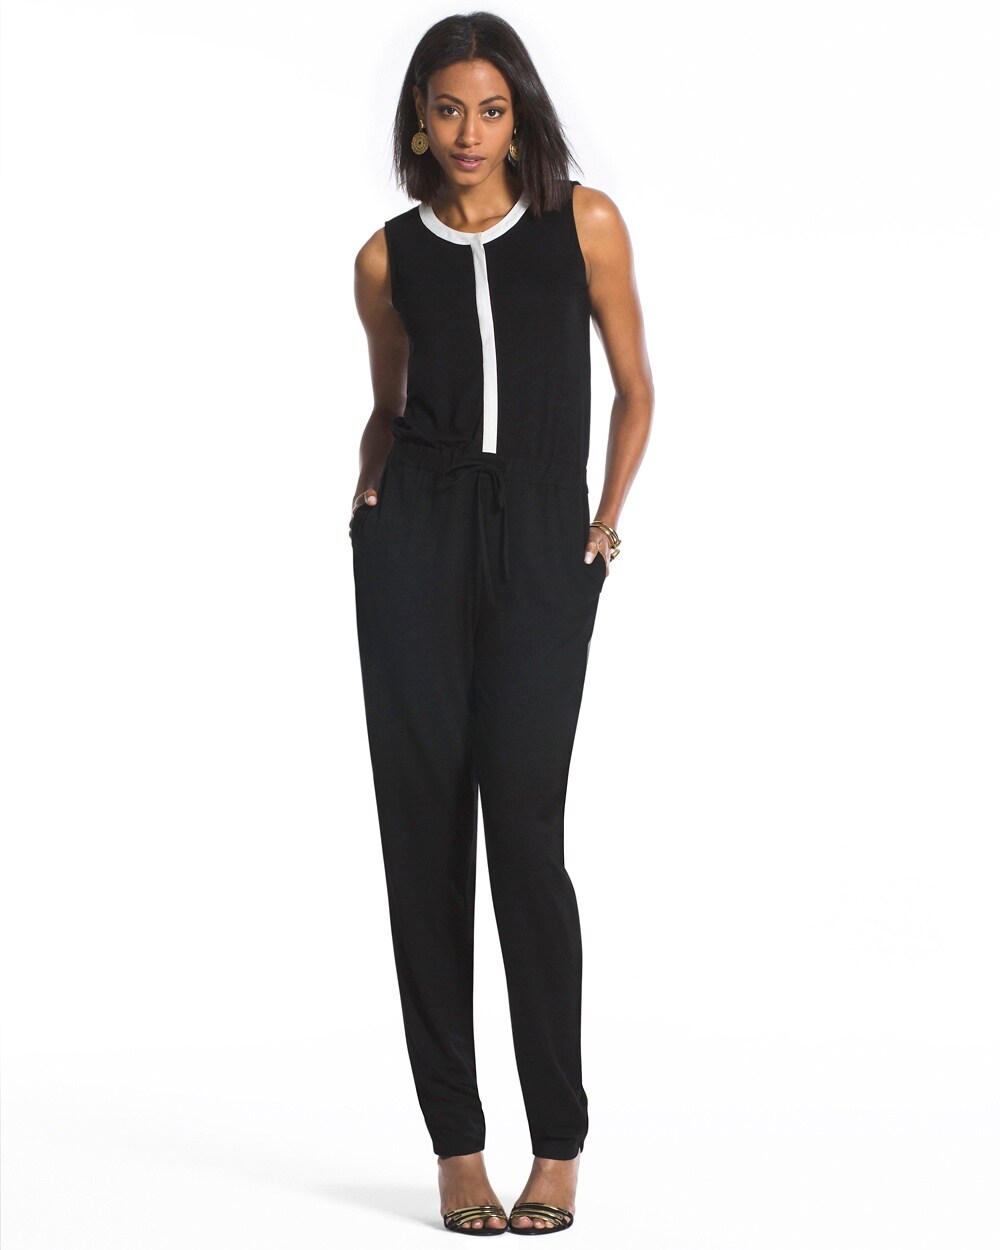 New Arrivals - Women's Clothing, Jewelry & More - Chico's